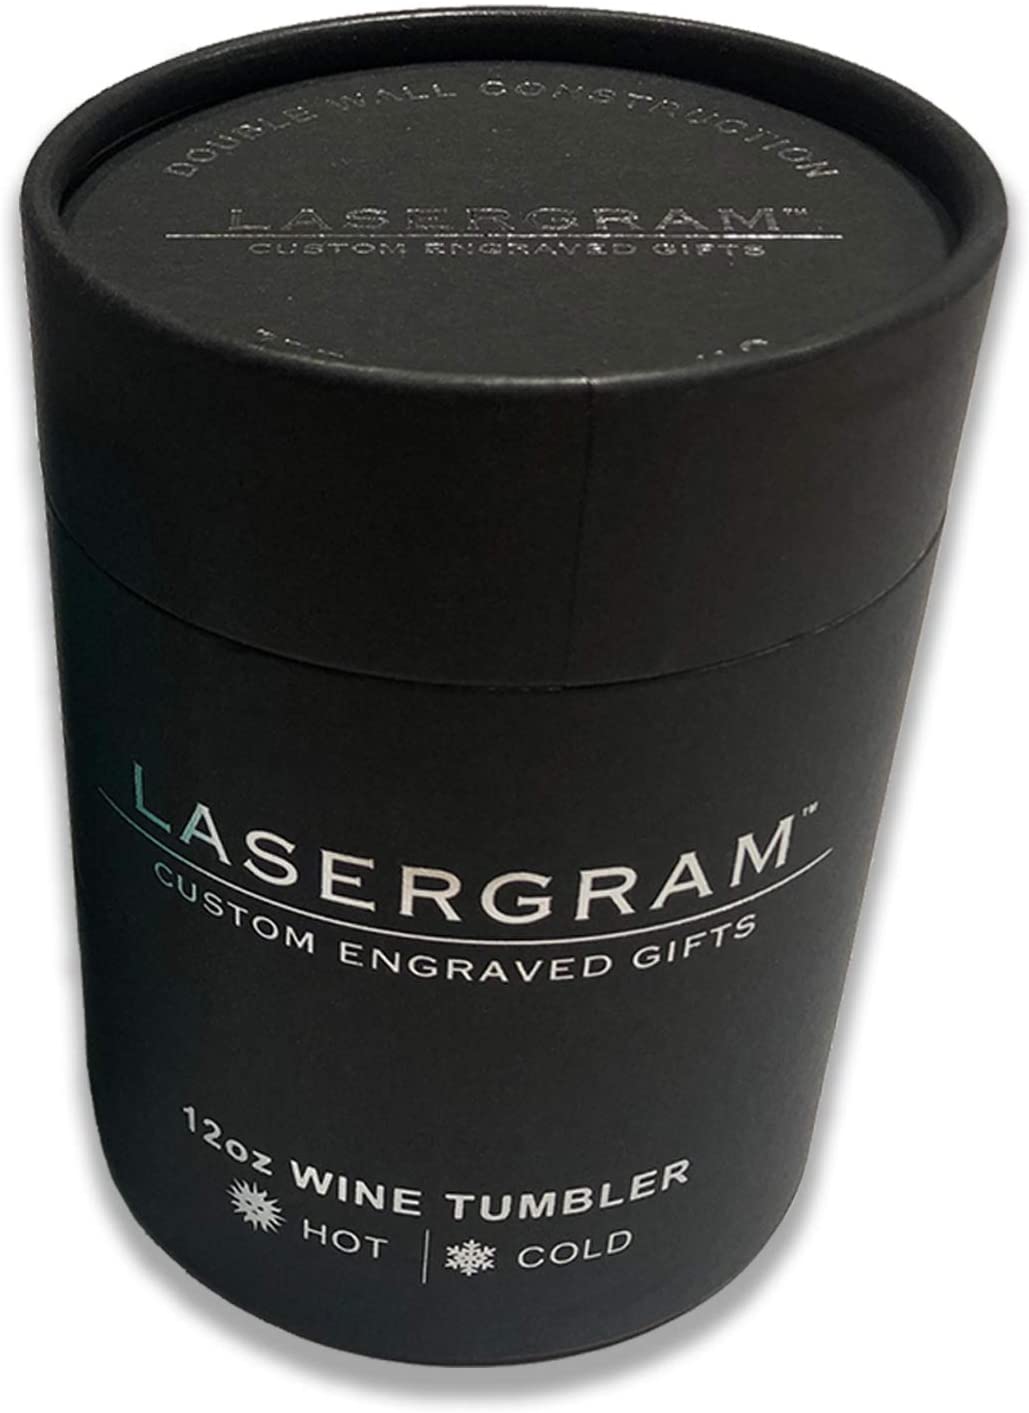 LaserGram Double Wall Stainless Steel Wine Glass, Tuba, Personalized Engraving Included